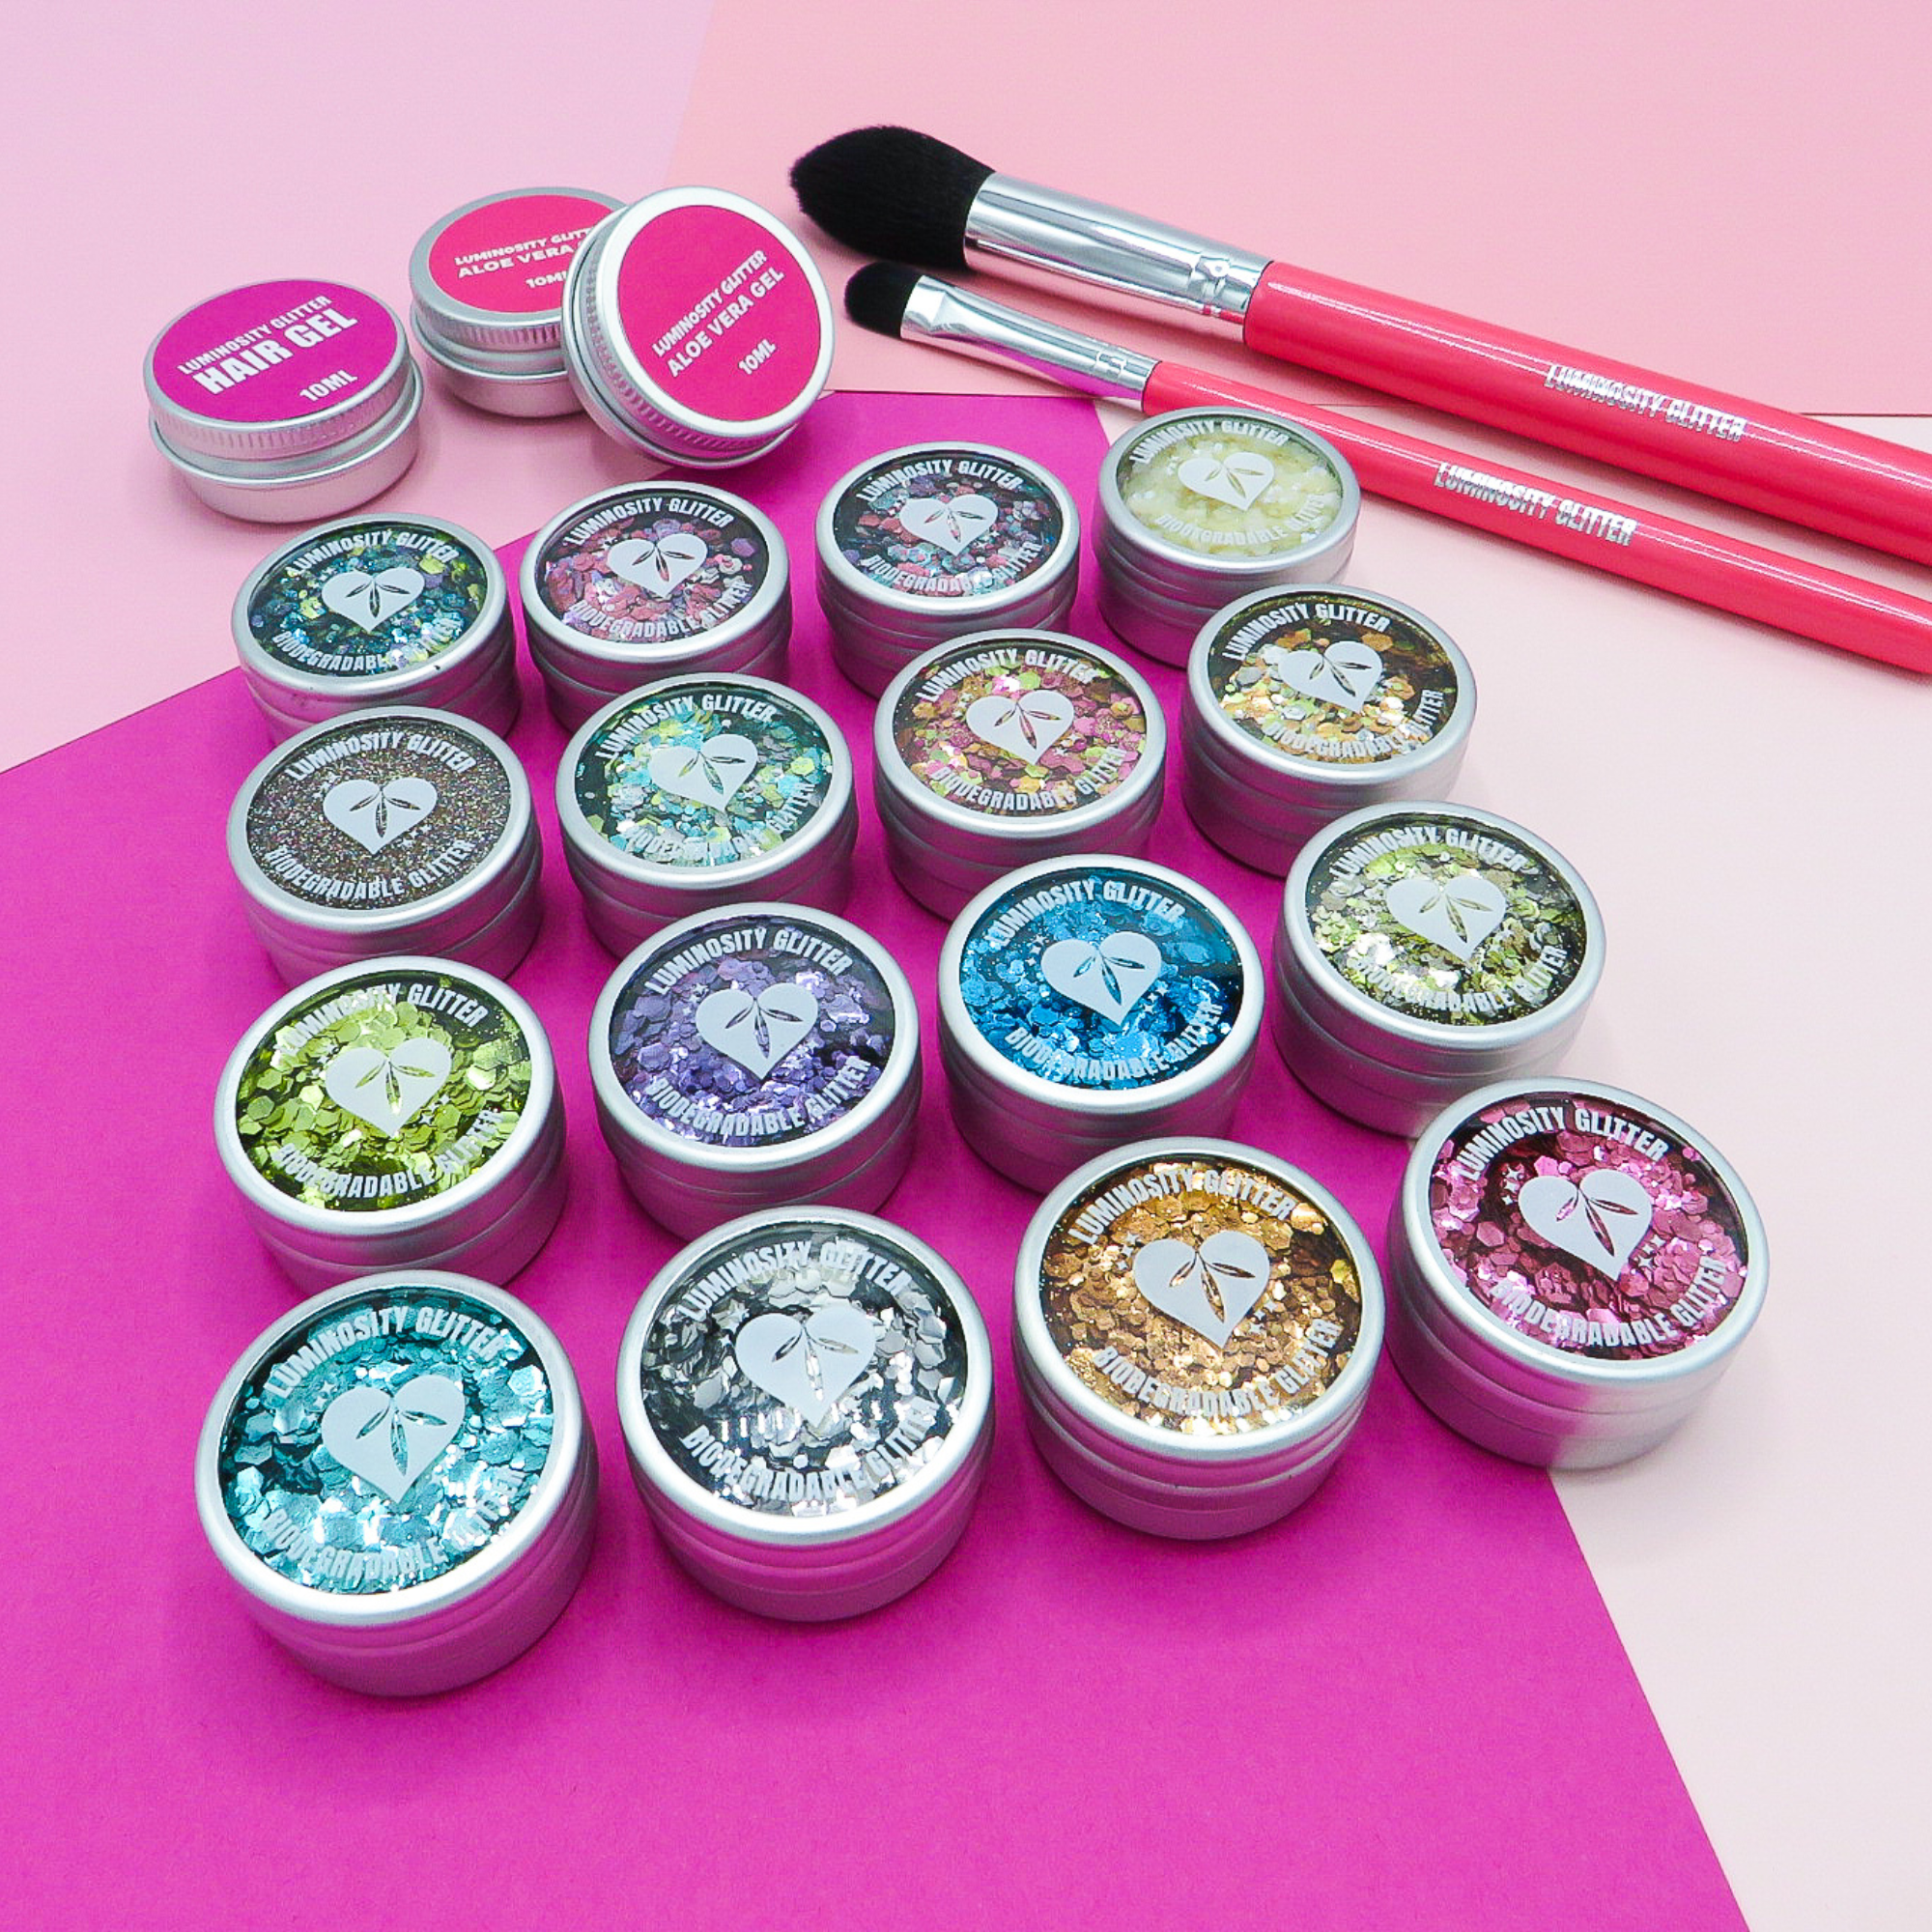 The super sparkle eco glitter kit by Luminosity Glitter has 16 eco friendly glitter pots, two brushes, two pots of aloe vera gel and one pot of Vegan hair gel for application.